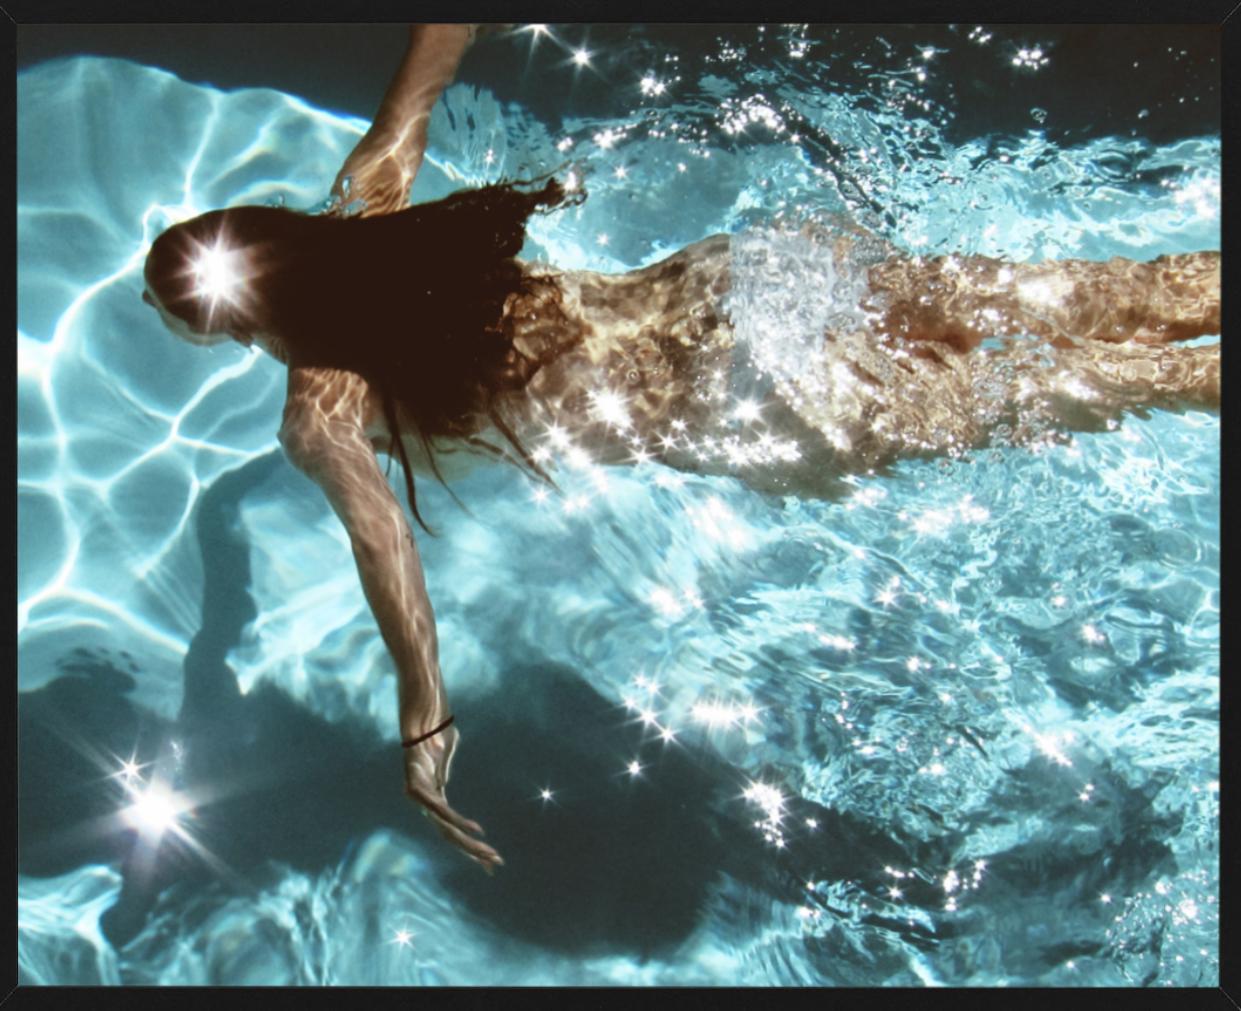 La Piscina, Capri - Naked woman in pool swimming underwater - Photograph by Florian Innerkofler